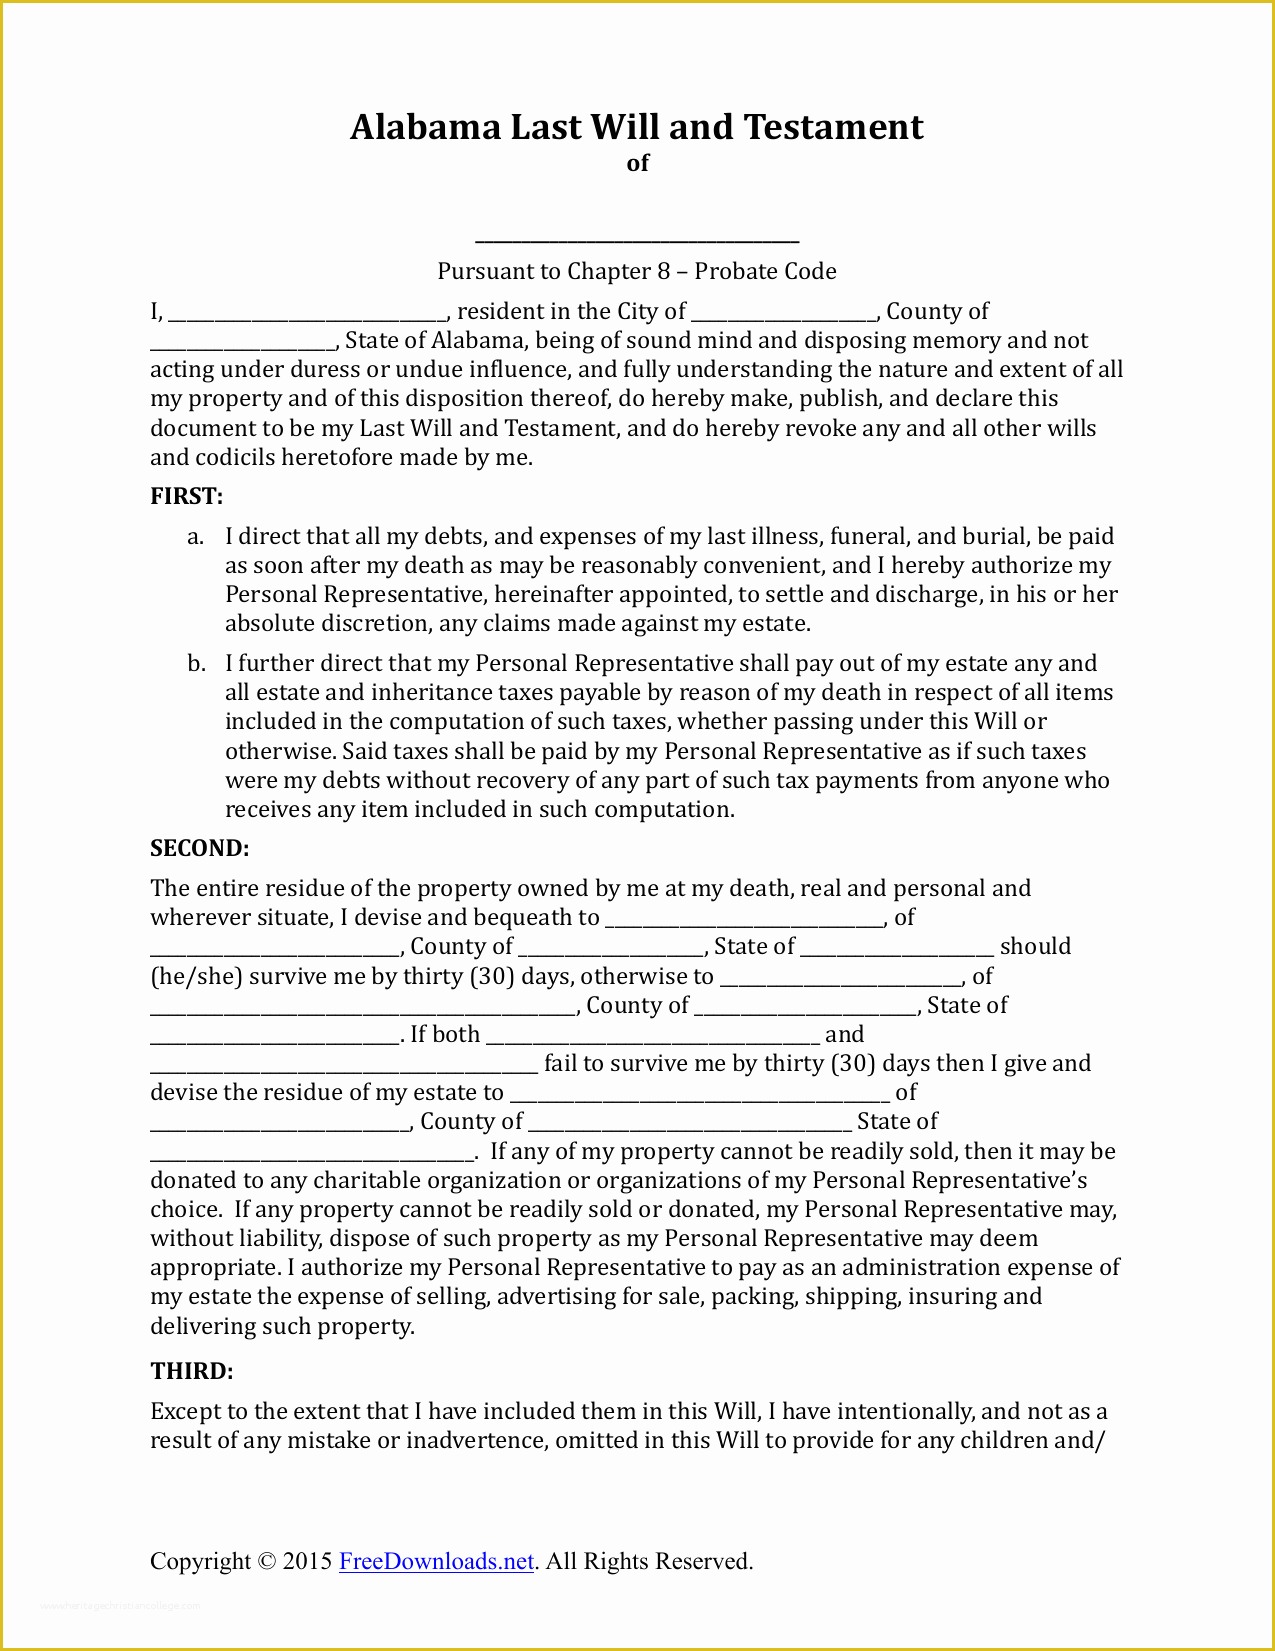 Last Will and Testament Free Template Of Download Alabama Last Will and Testament form Pdf